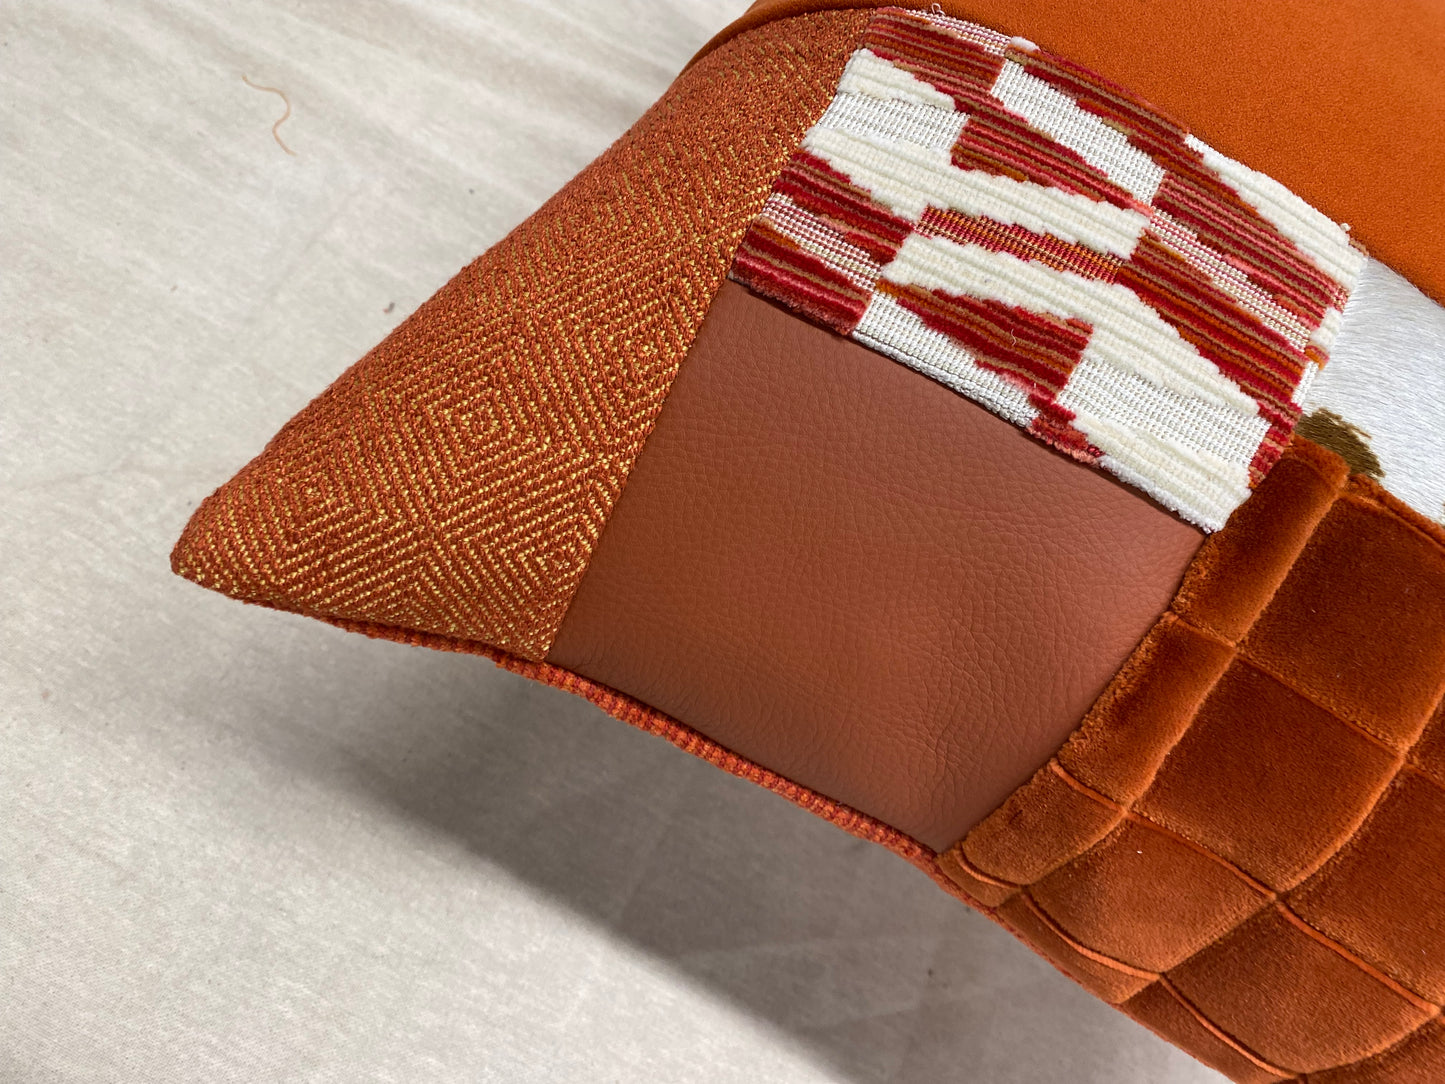 Burnt Orange 22 x 22 Feature Pillow with Suede and Leather Accents